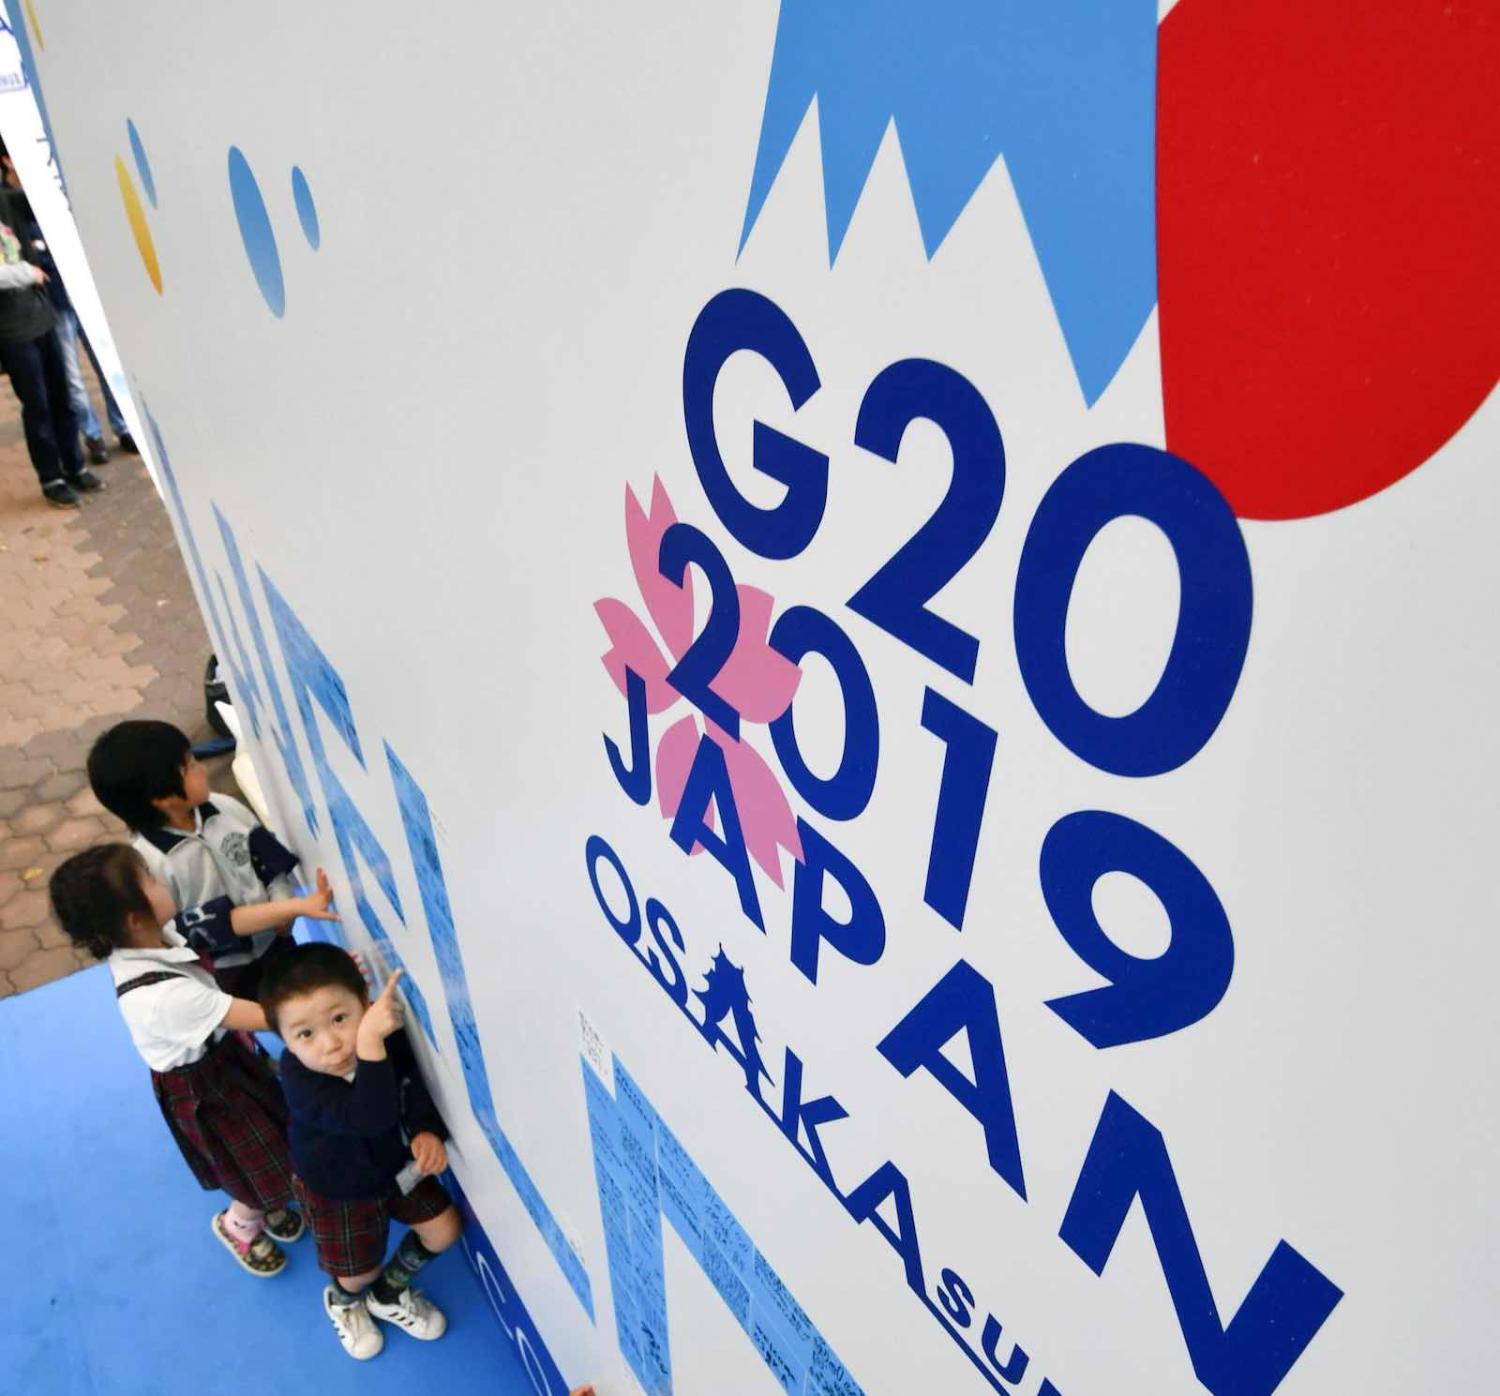 Economic diplomacy: G20 warms up, the China drip and open trade talks